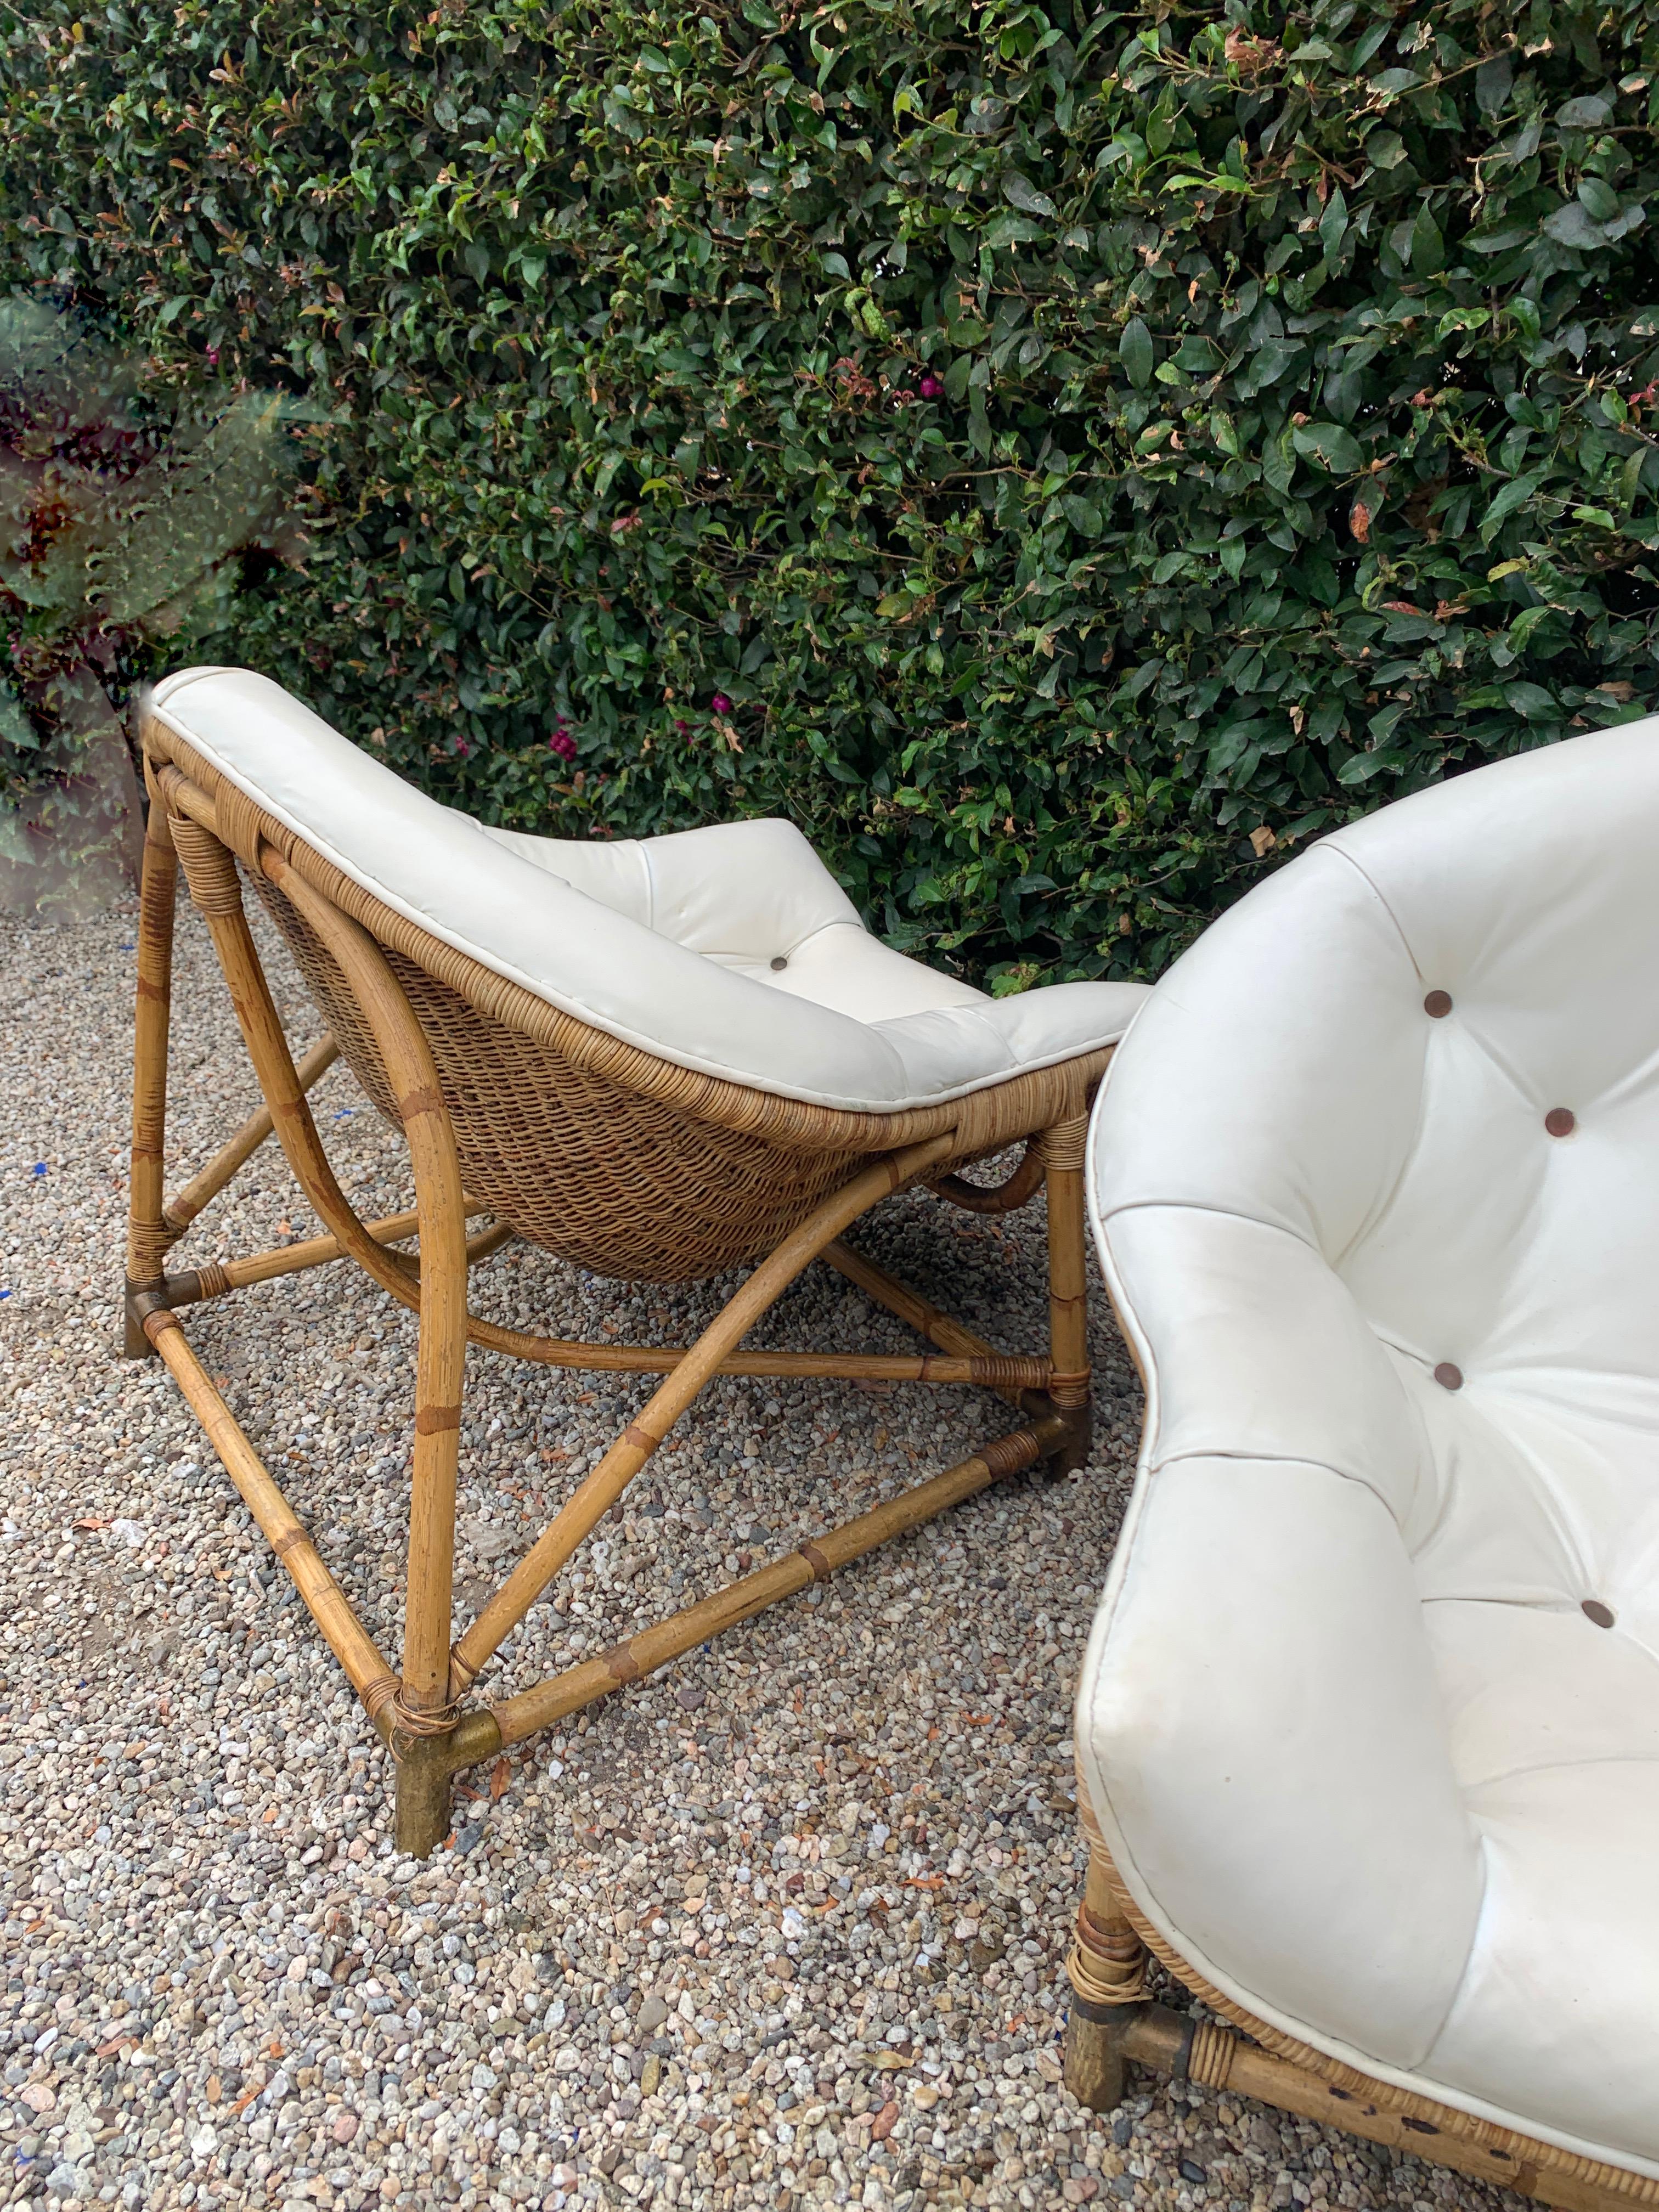 Unique and well designed, a pair of Rattan and Bamboo Lounge chairs. The vintage pair have a very intricate and well thought out design with brass sabots. The seats are very comfortable and also in a unique and moorish shaped cushion. 

Low and